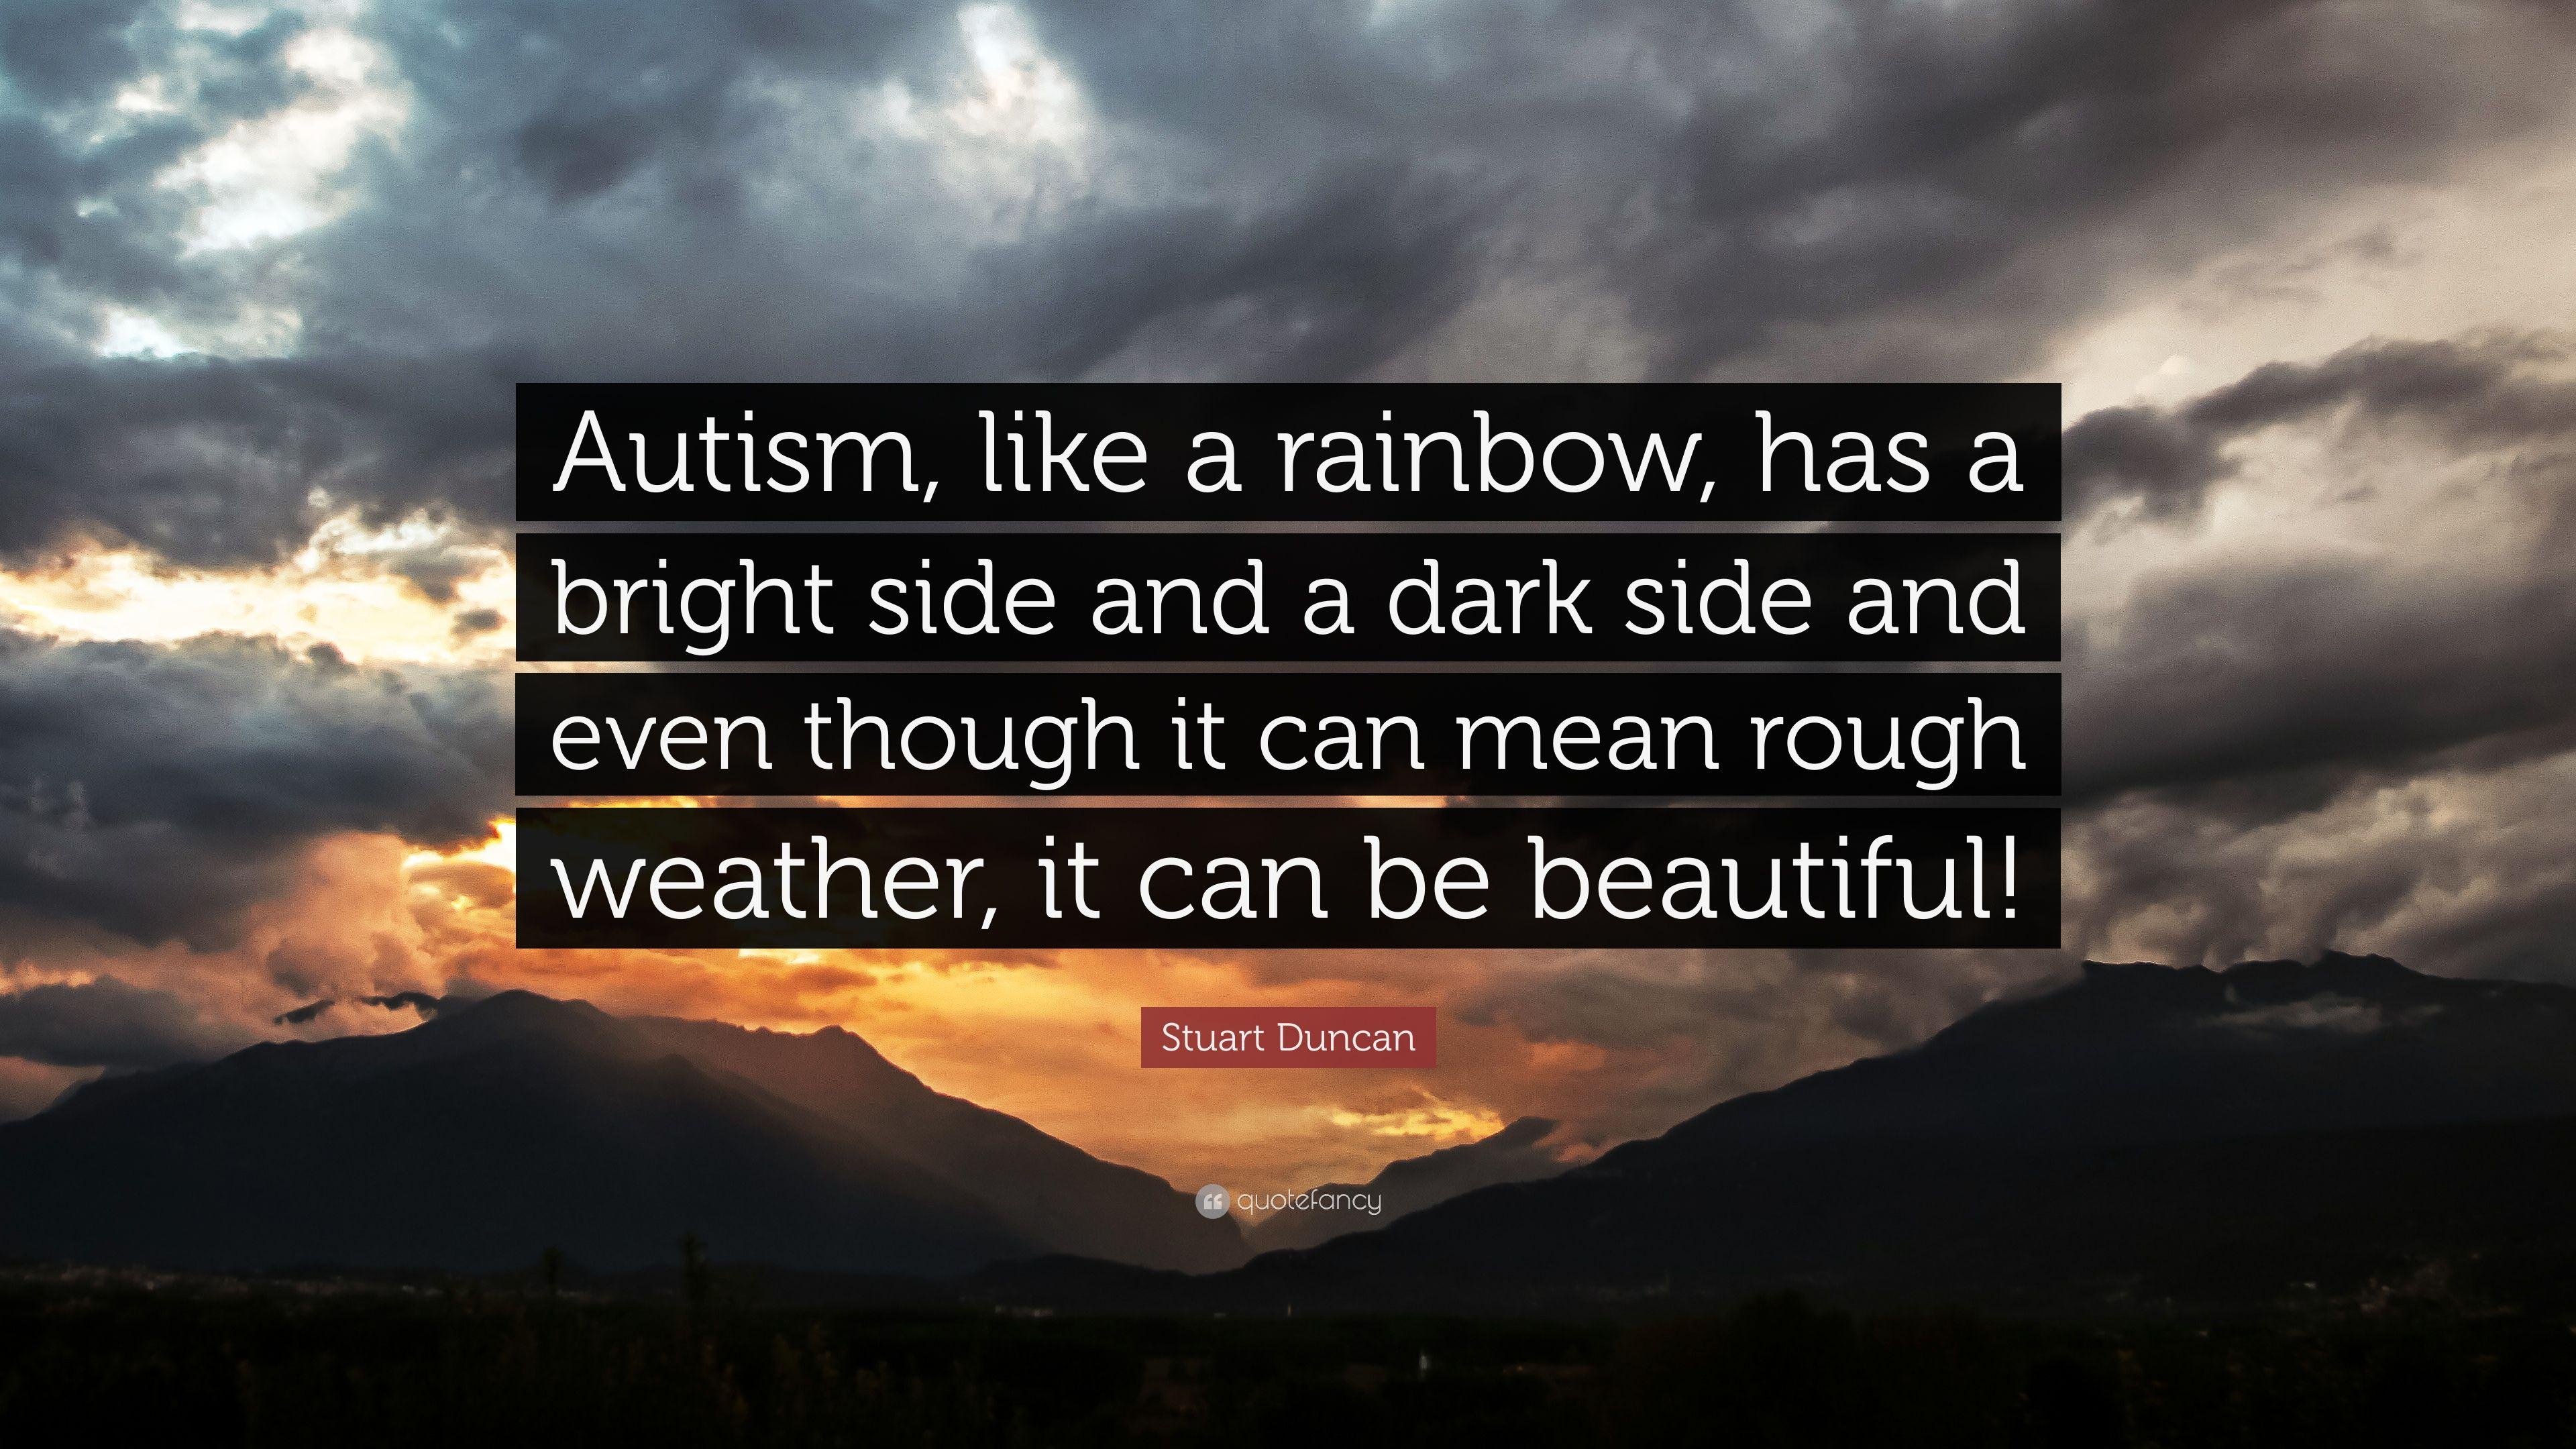 Stuart Duncan Quote: “Autism, like a rainbow, has a bright side